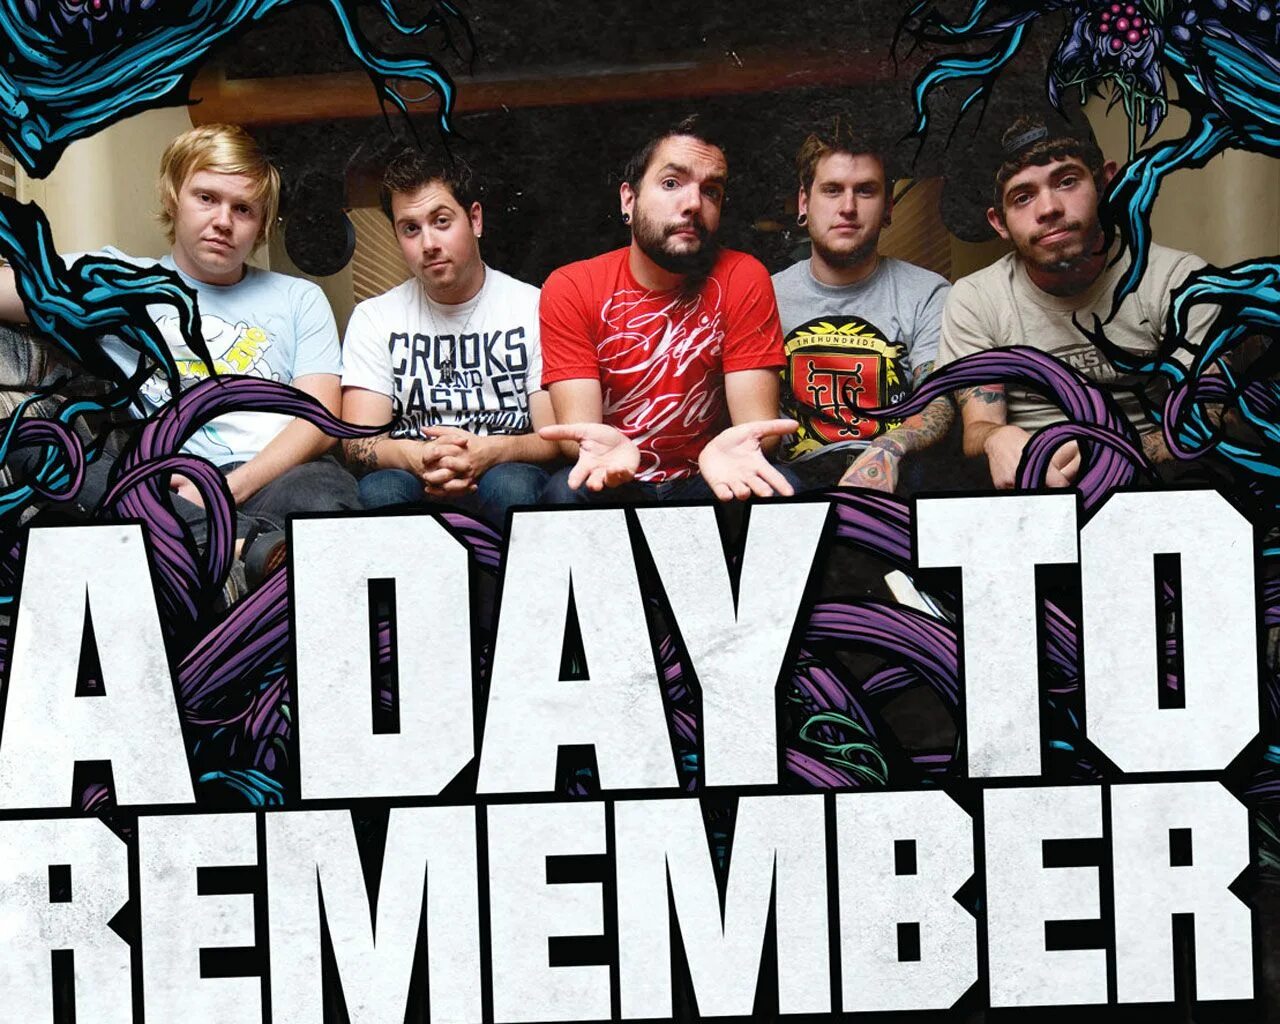 Remember music. A Day to remember. Remember группа. A Day to remember 2021. Плакат группы a Day to remember.